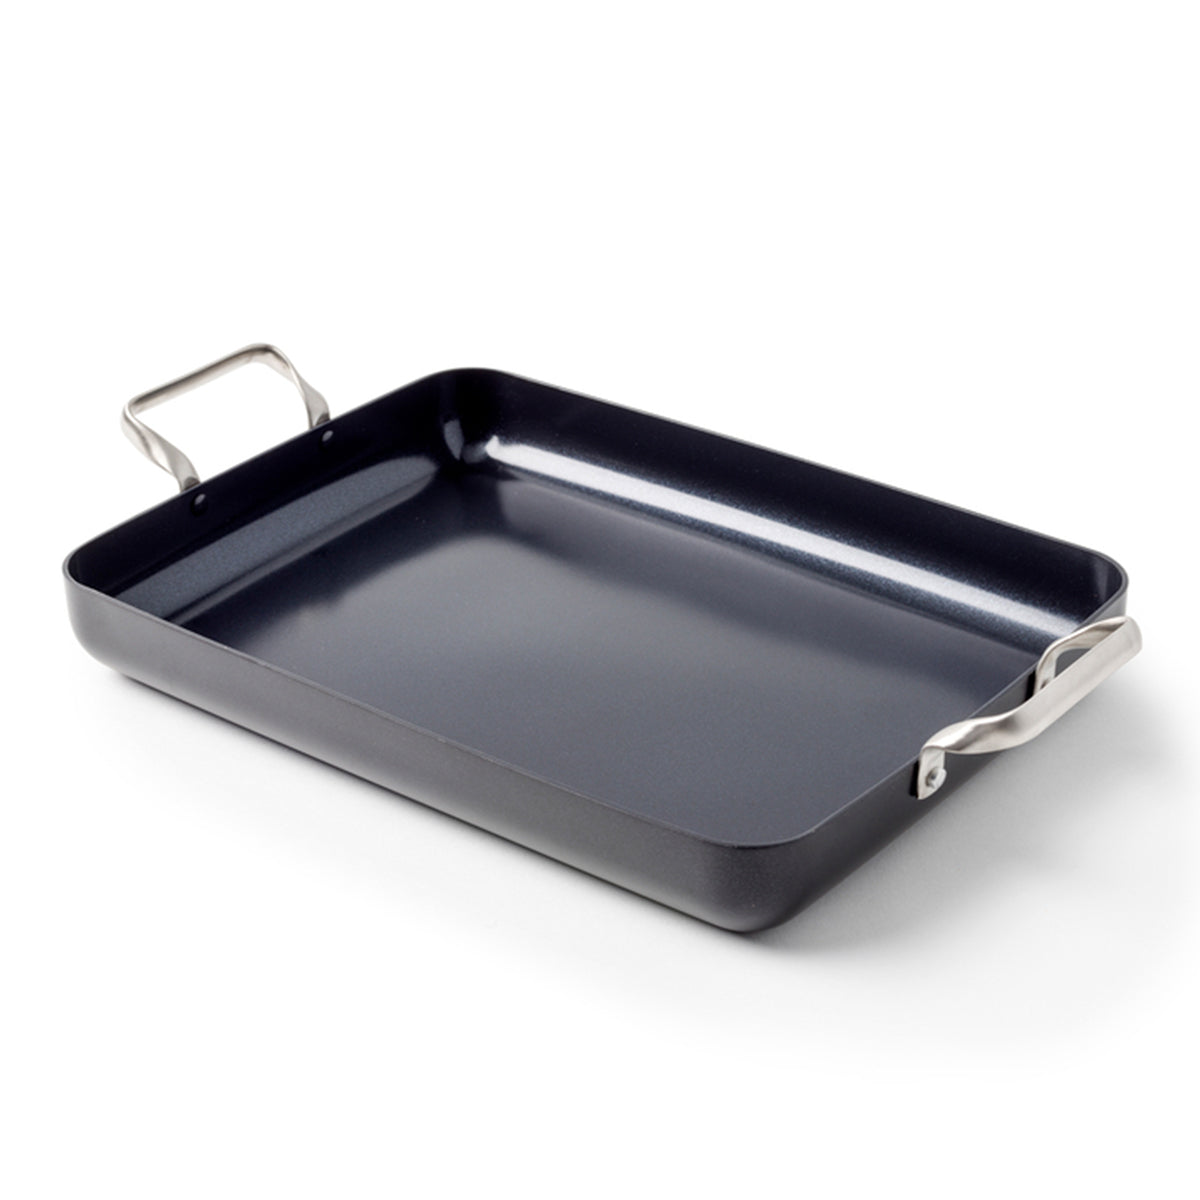  Le Creuset Stainless Steel Roasting Pan with Nonstick